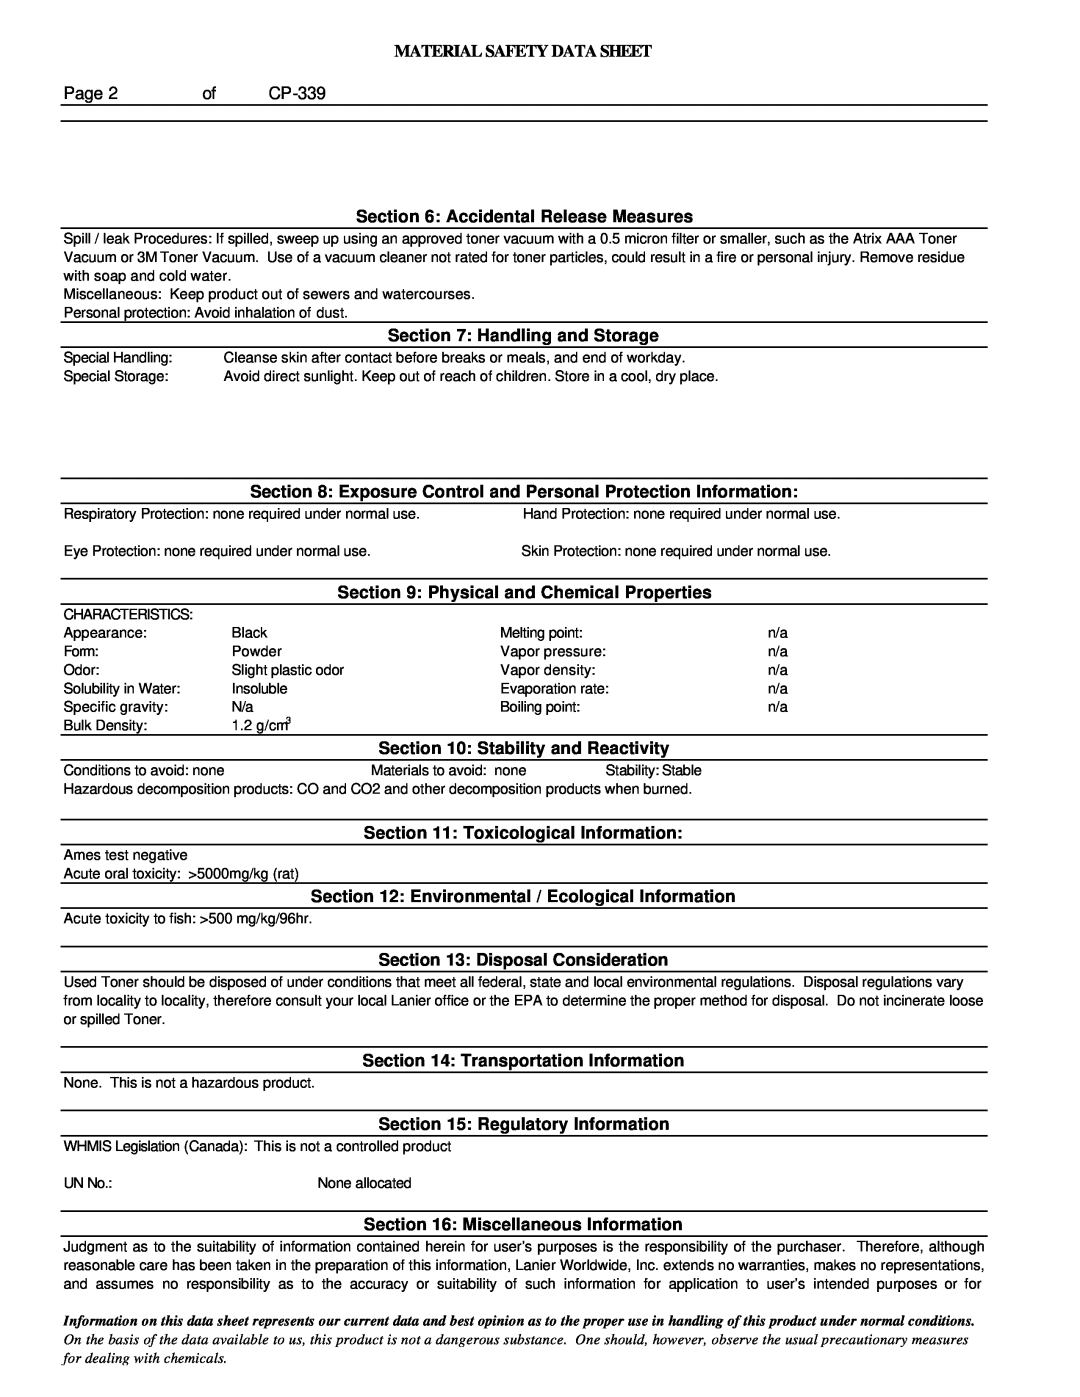 Lanier 5485 manual Material Safety Data Sheet, Accidental Release Measures 